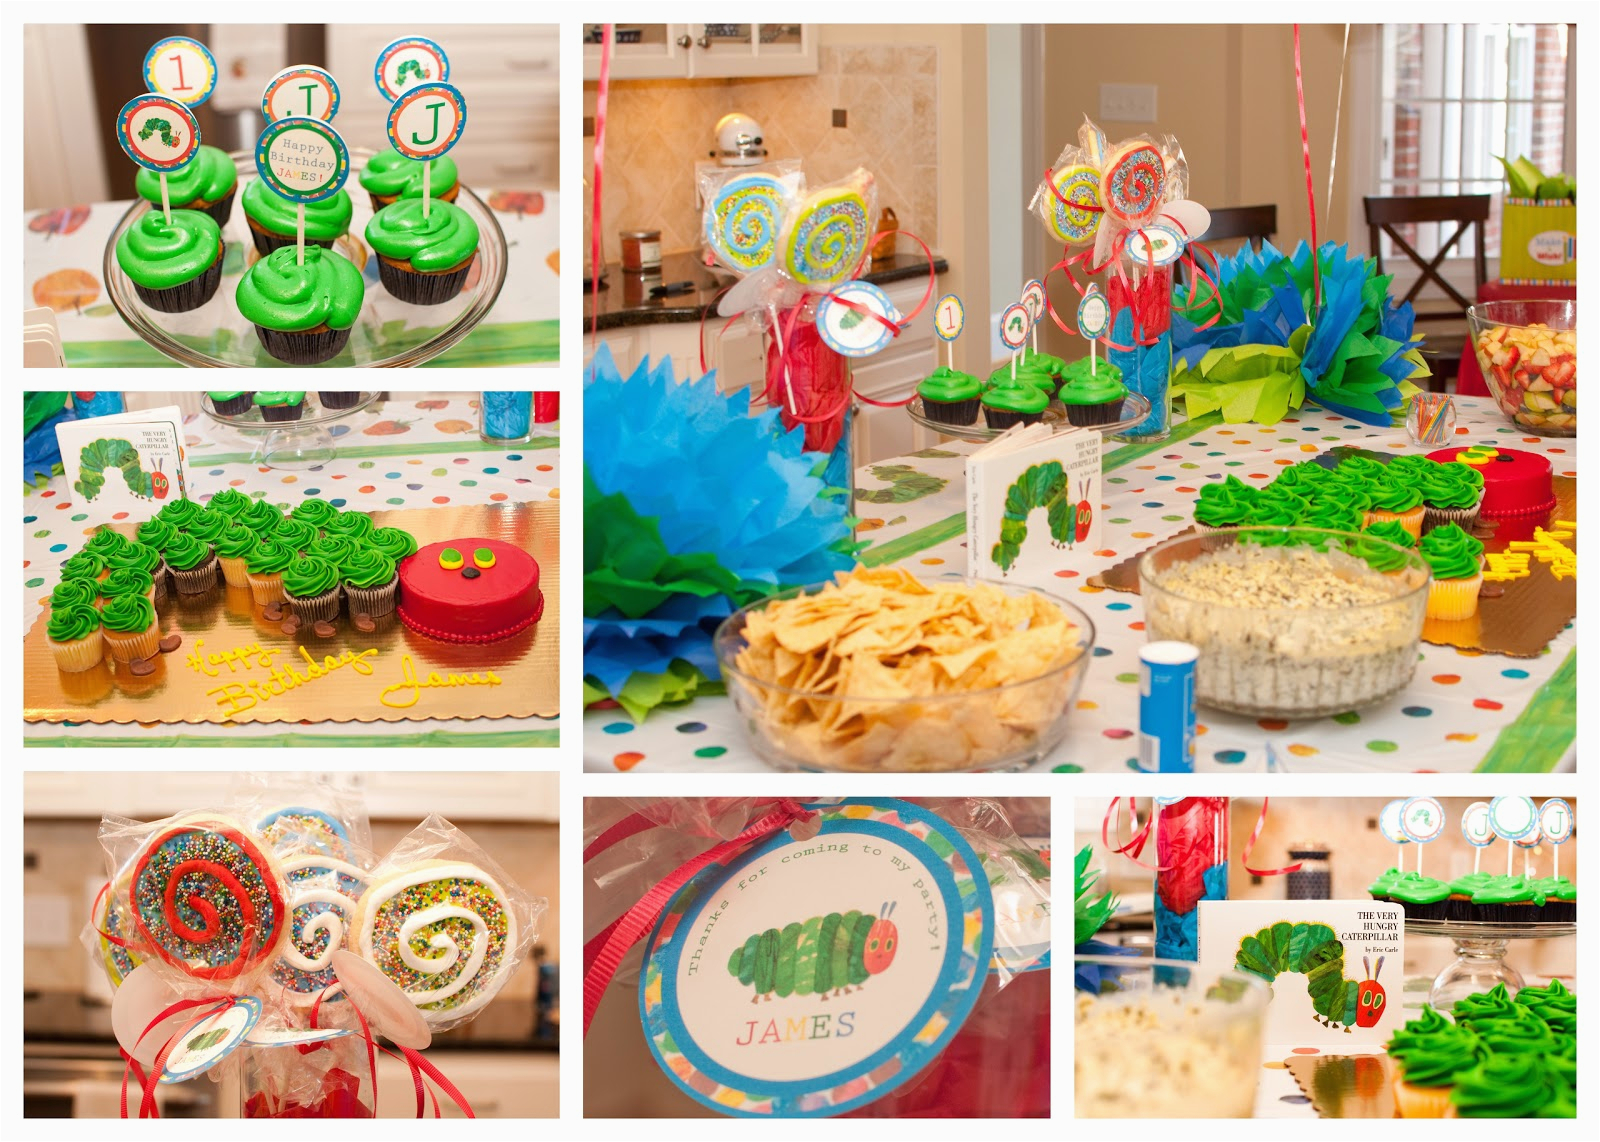 The Very Hungry Caterpillar Birthday Party Decorations the Very Hungry Caterpillar First Birthday Party the